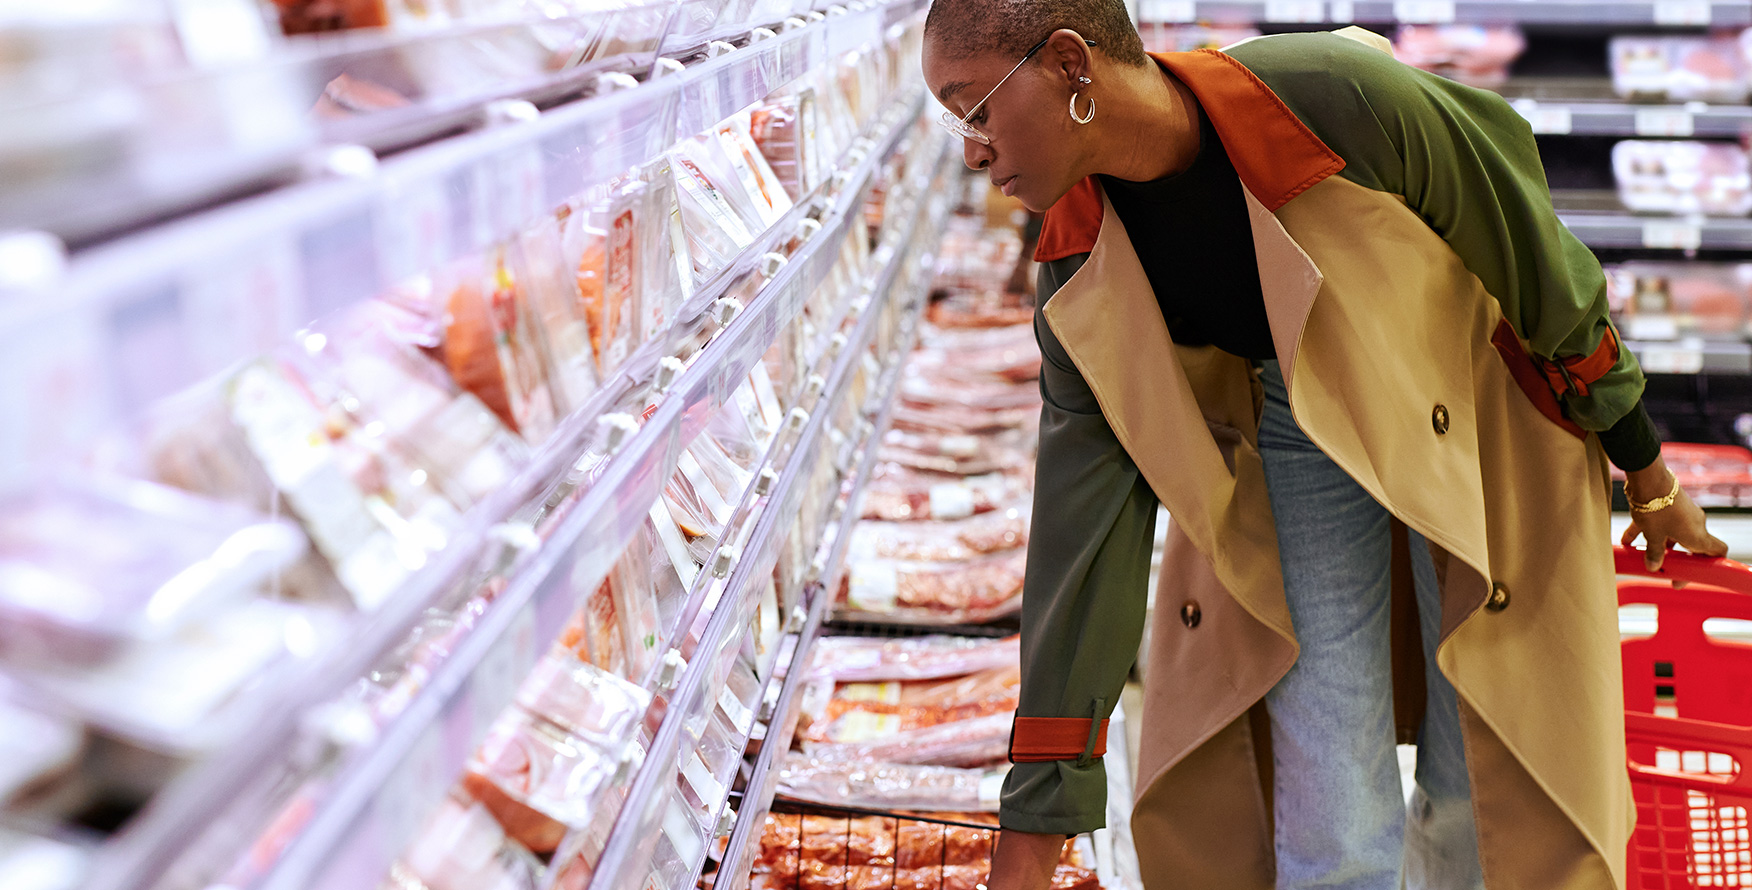 Woman examining a package of pork in a grocery store